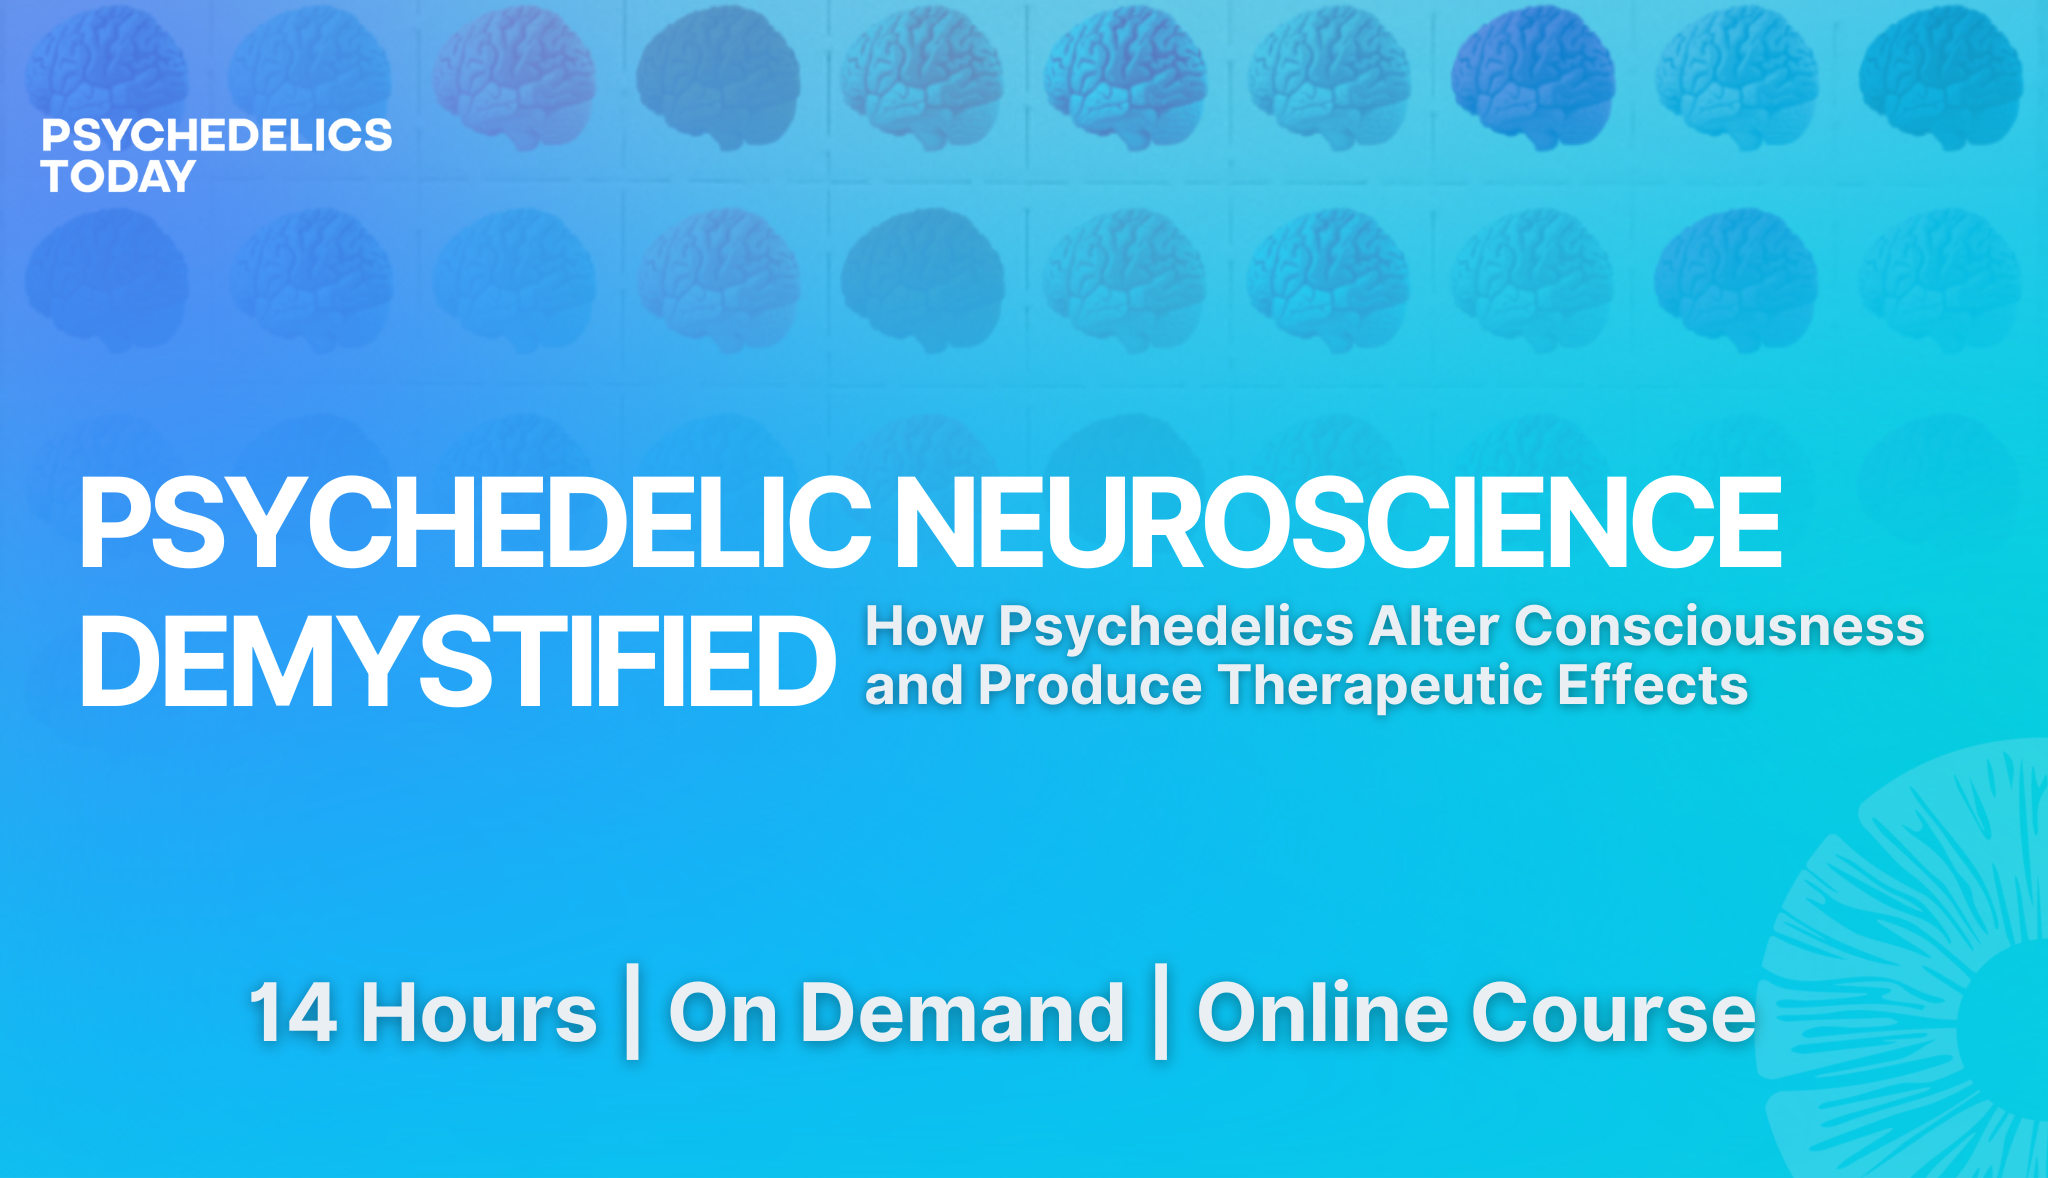 Psychedelic Neuroscience Demystified